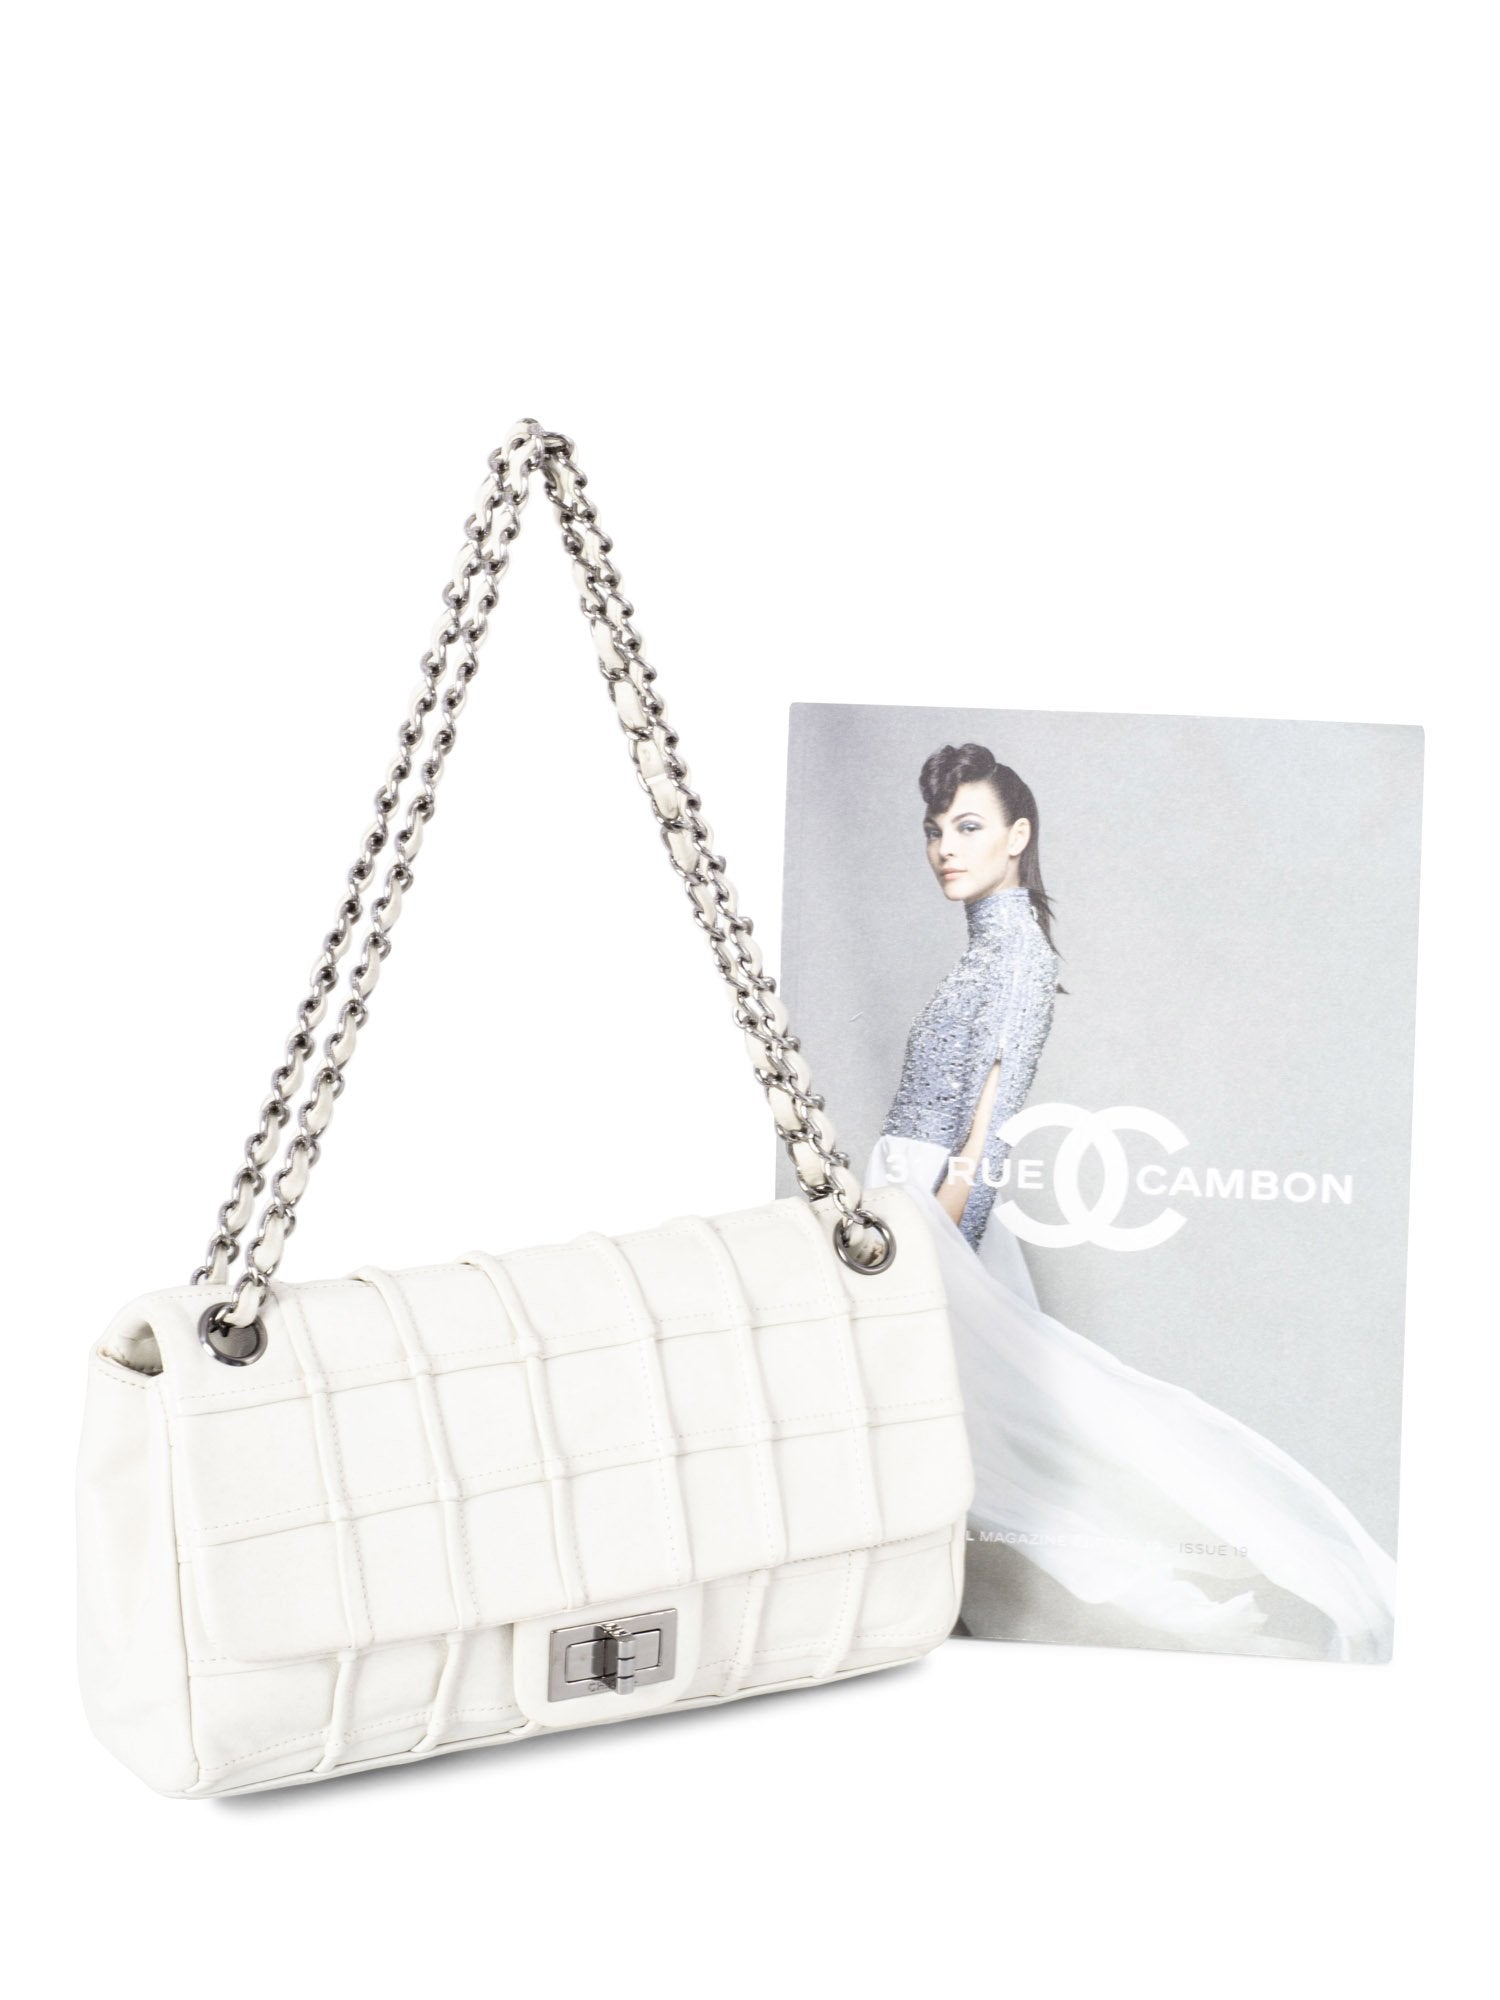 CHANEL Square Quilted Leather Medium Reissue Flap Bag White-designer resale